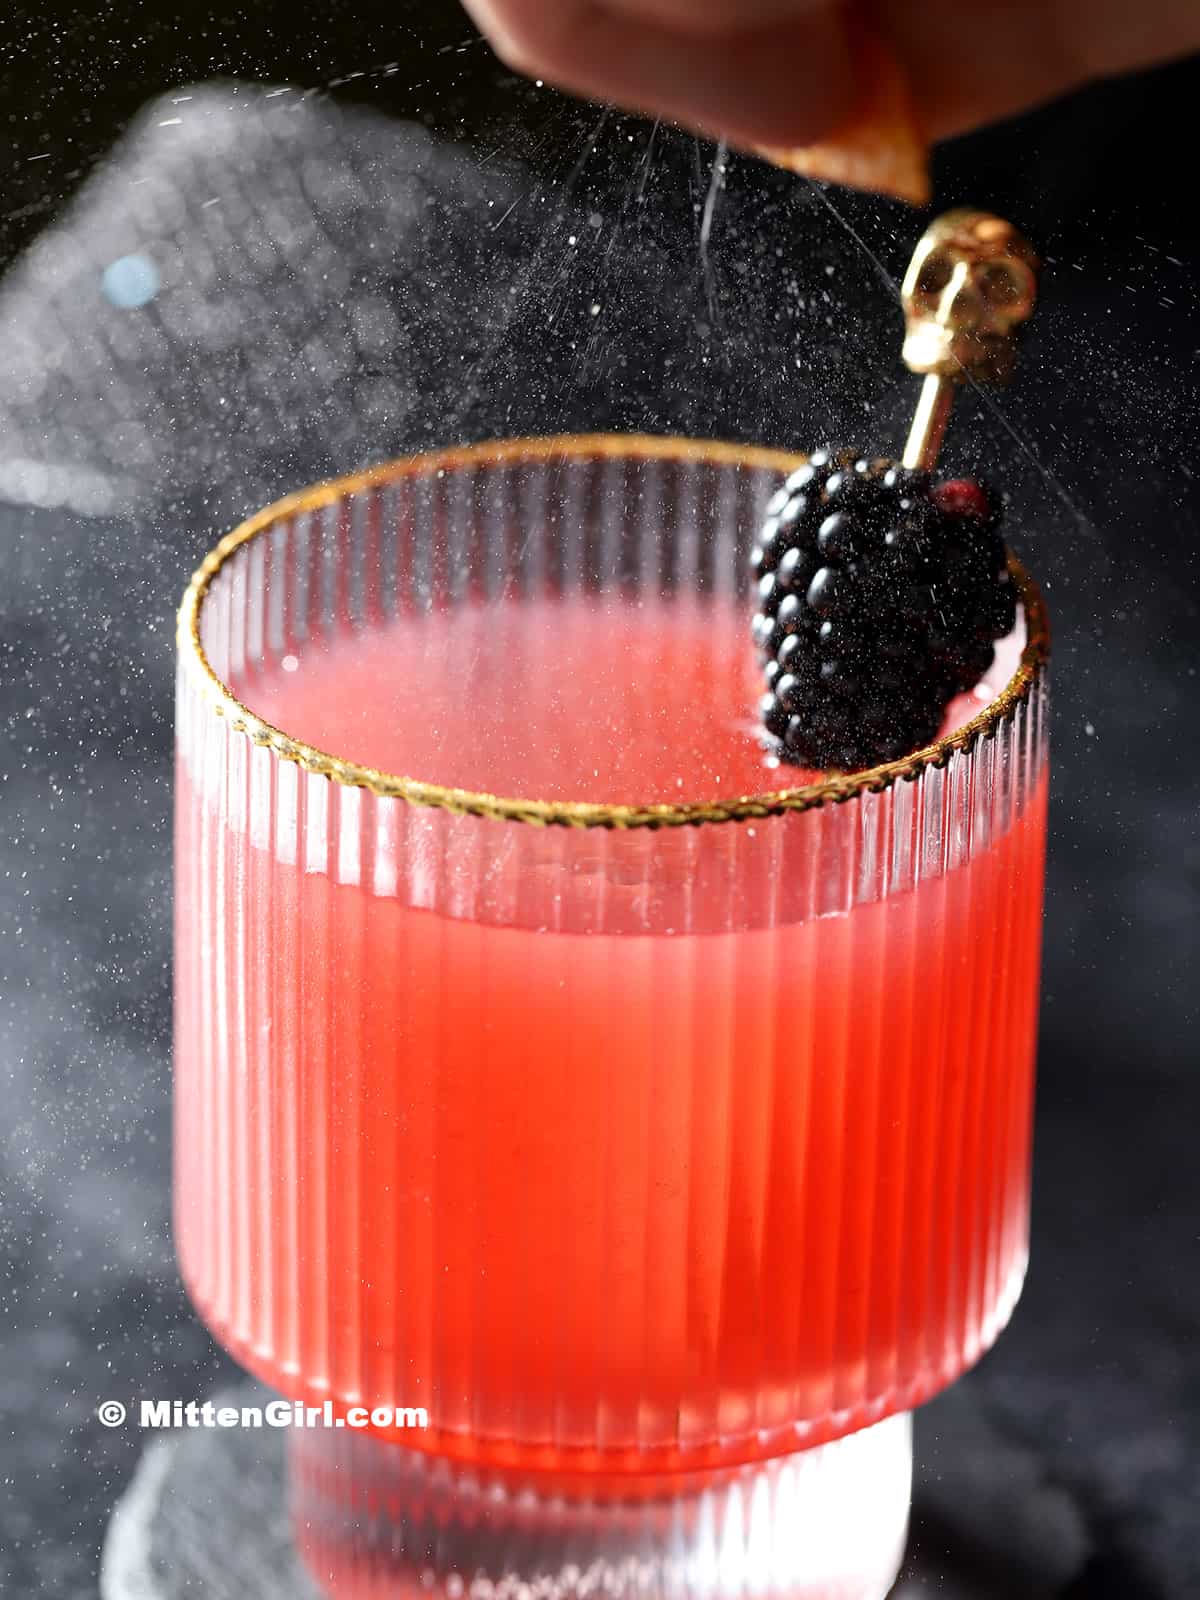 Orange oil from a peel being expressed over a glass of blackberry bourbon cocktail.